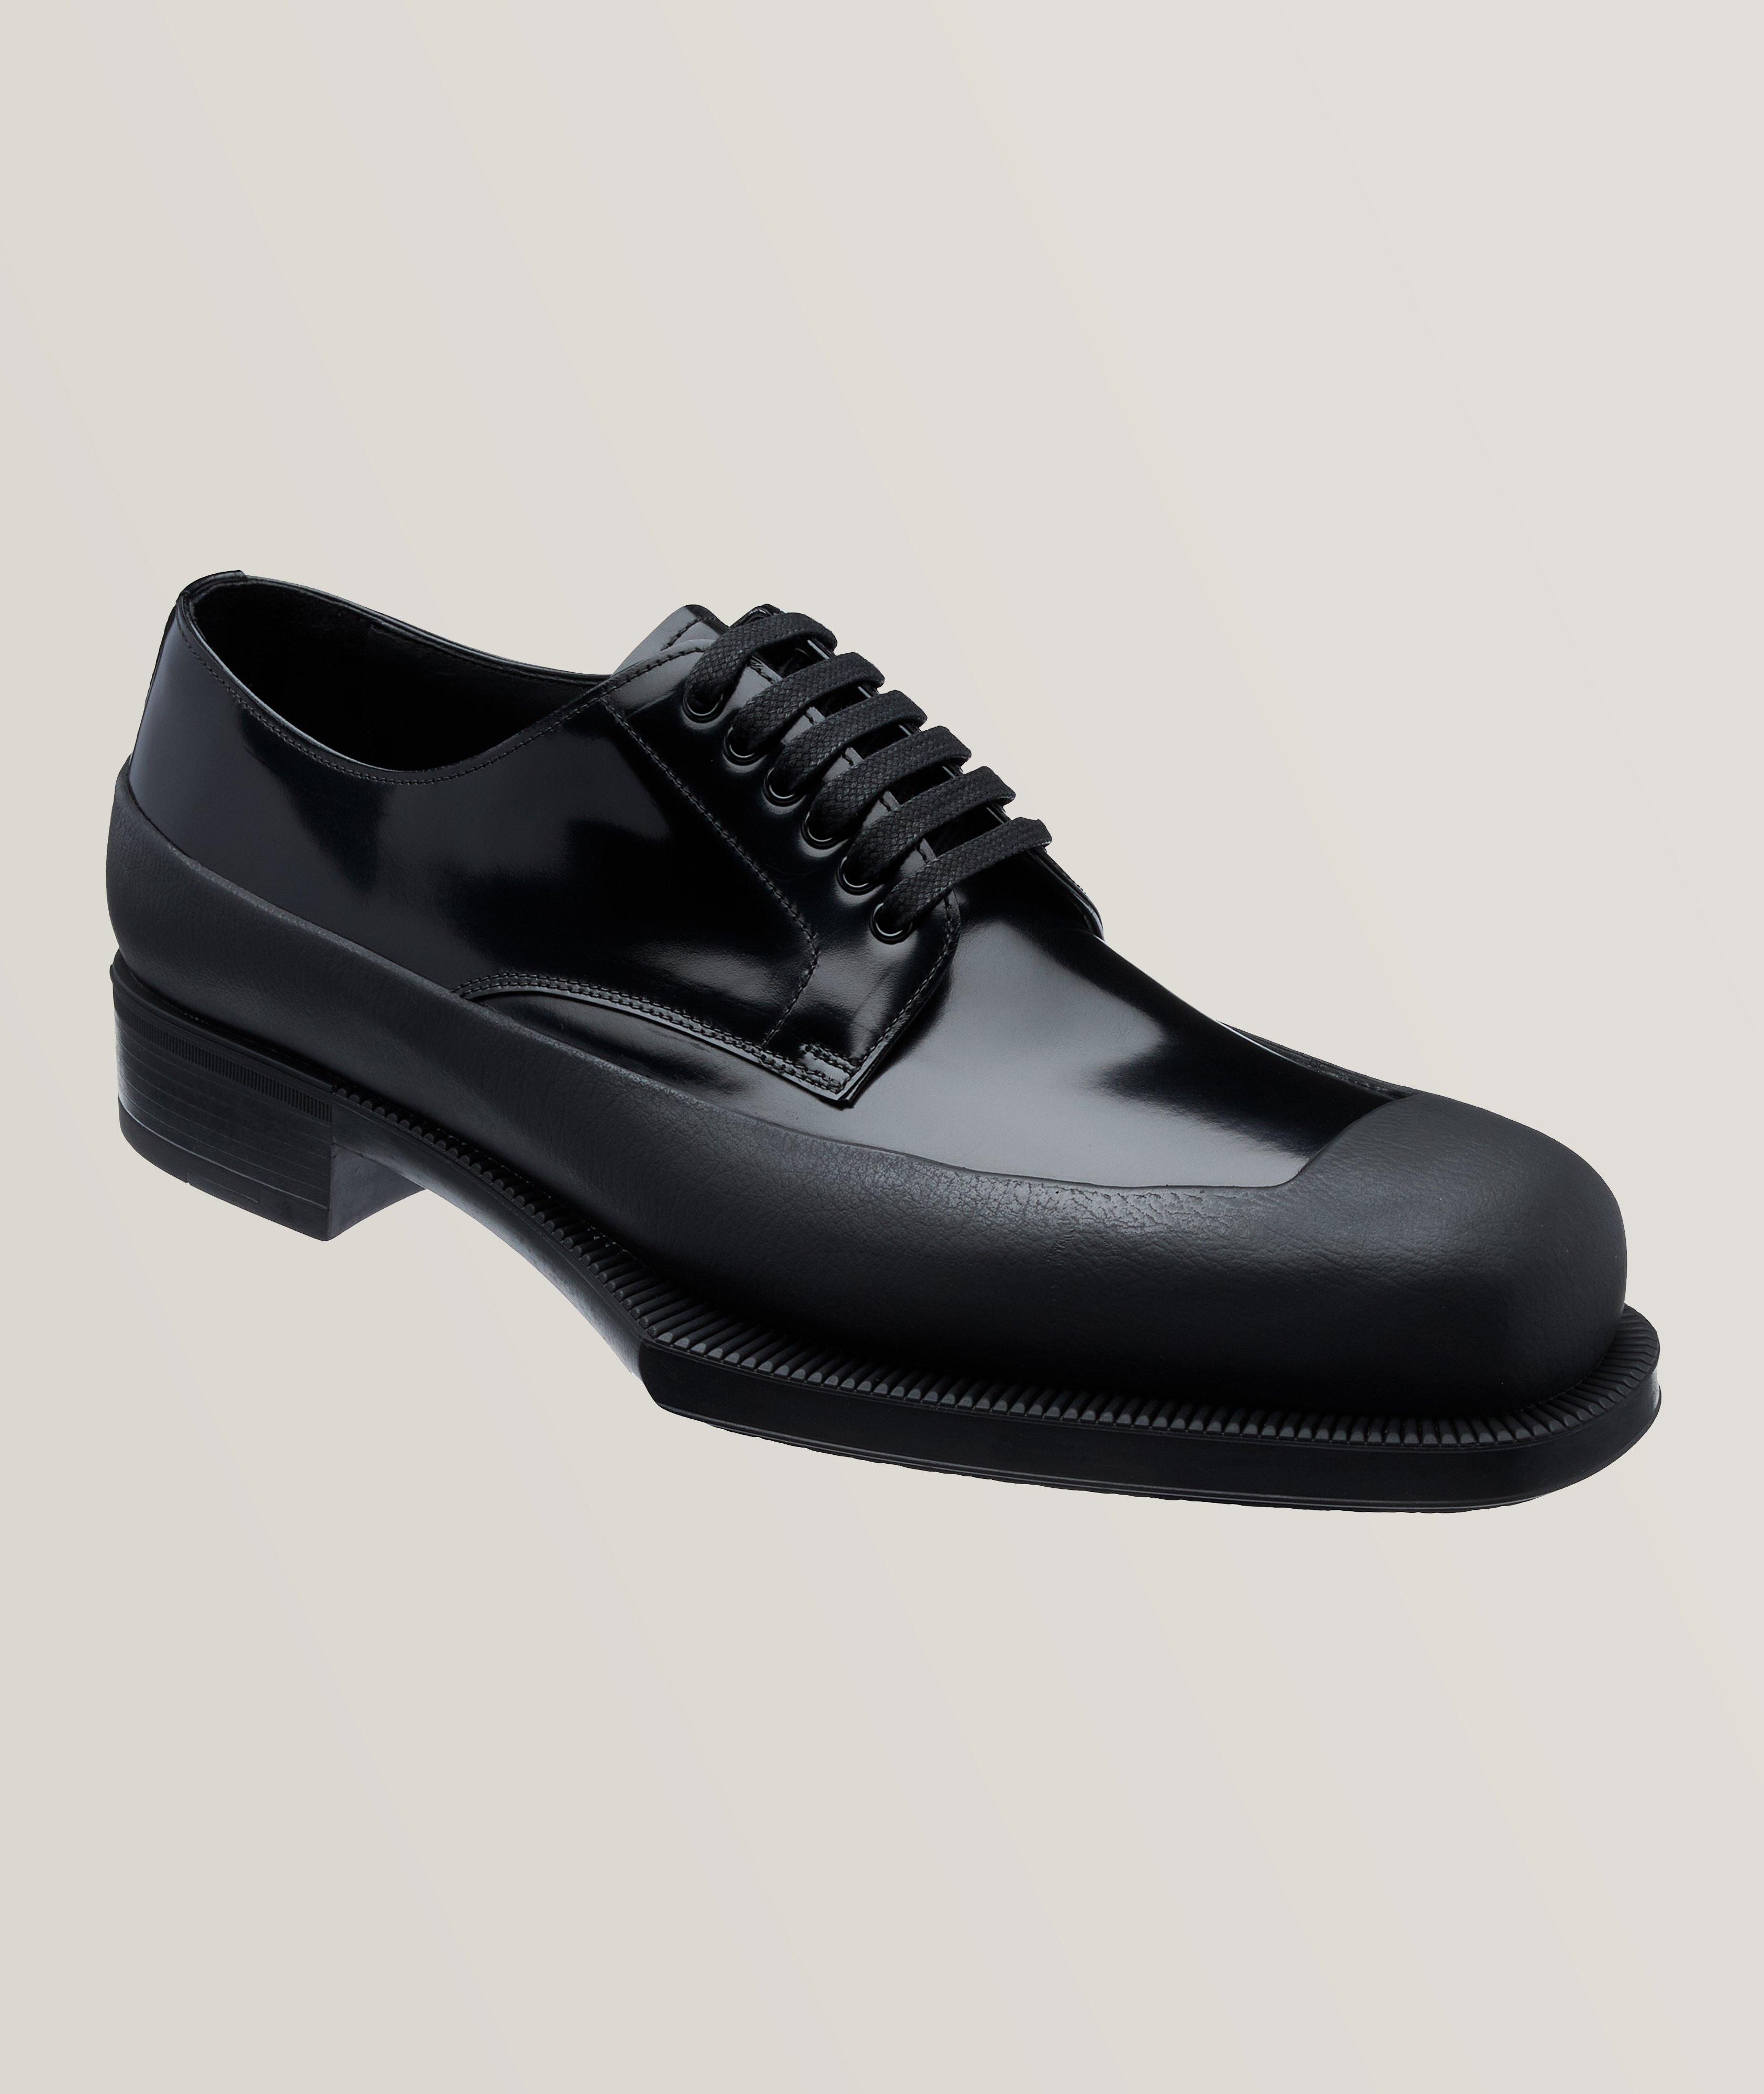 Leather Shell Expander Lace-Up Derbies image 0